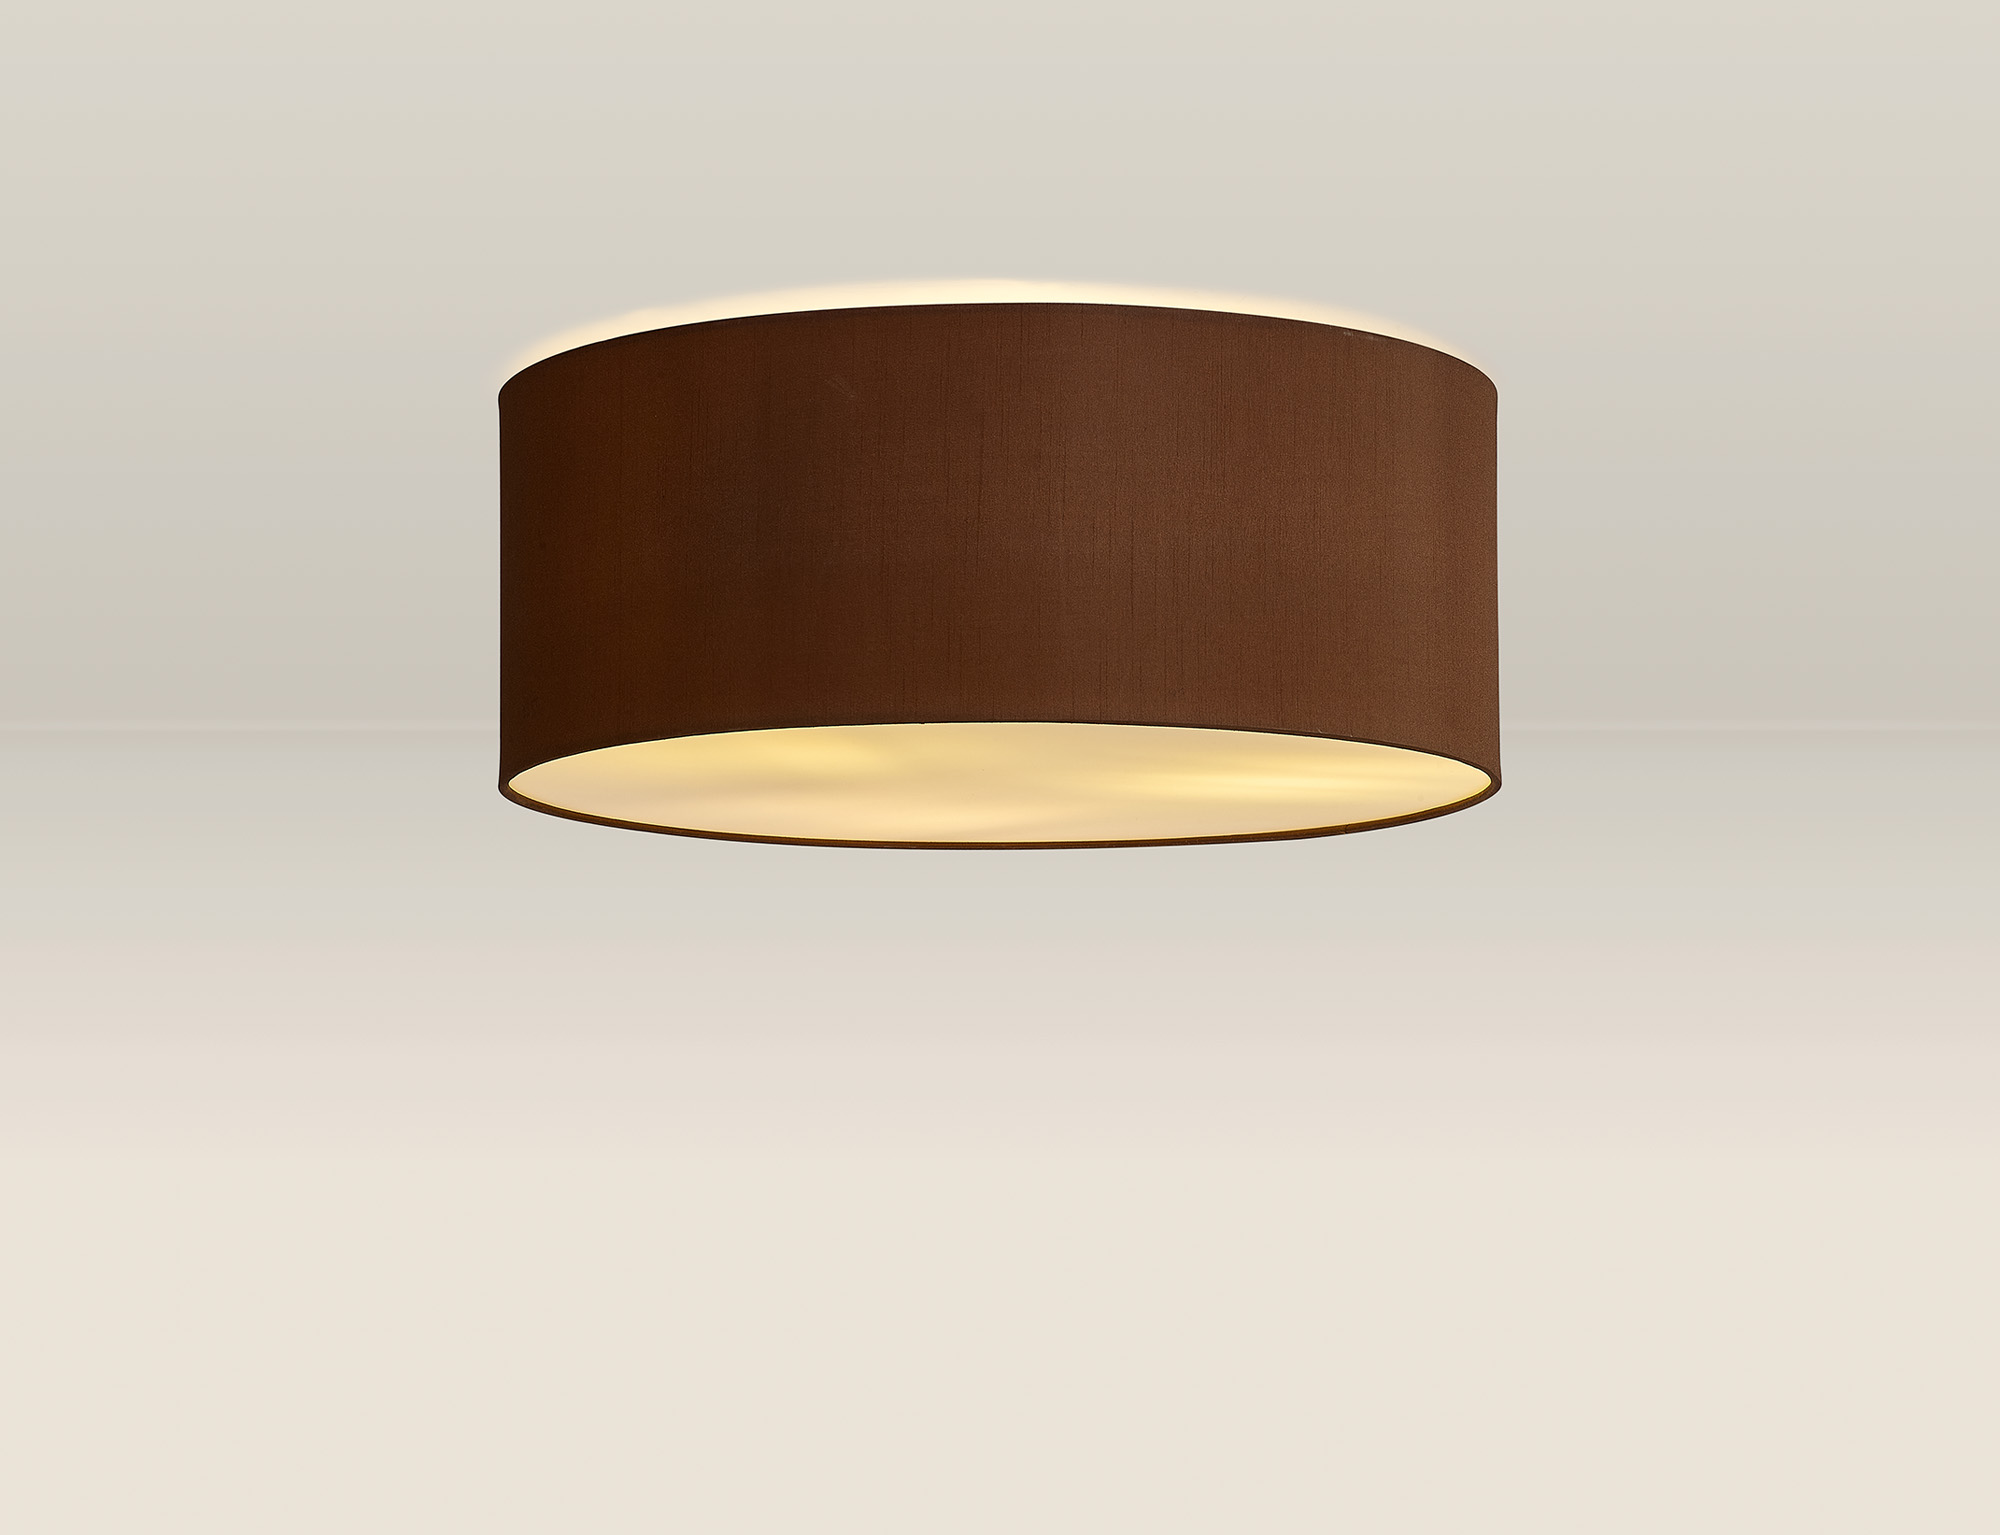 Baymont 50cm Flush 3 Light Raw Cocoa/Grecian Bronze; Frosted Diffuser DK0623  Deco Baymont WH RC